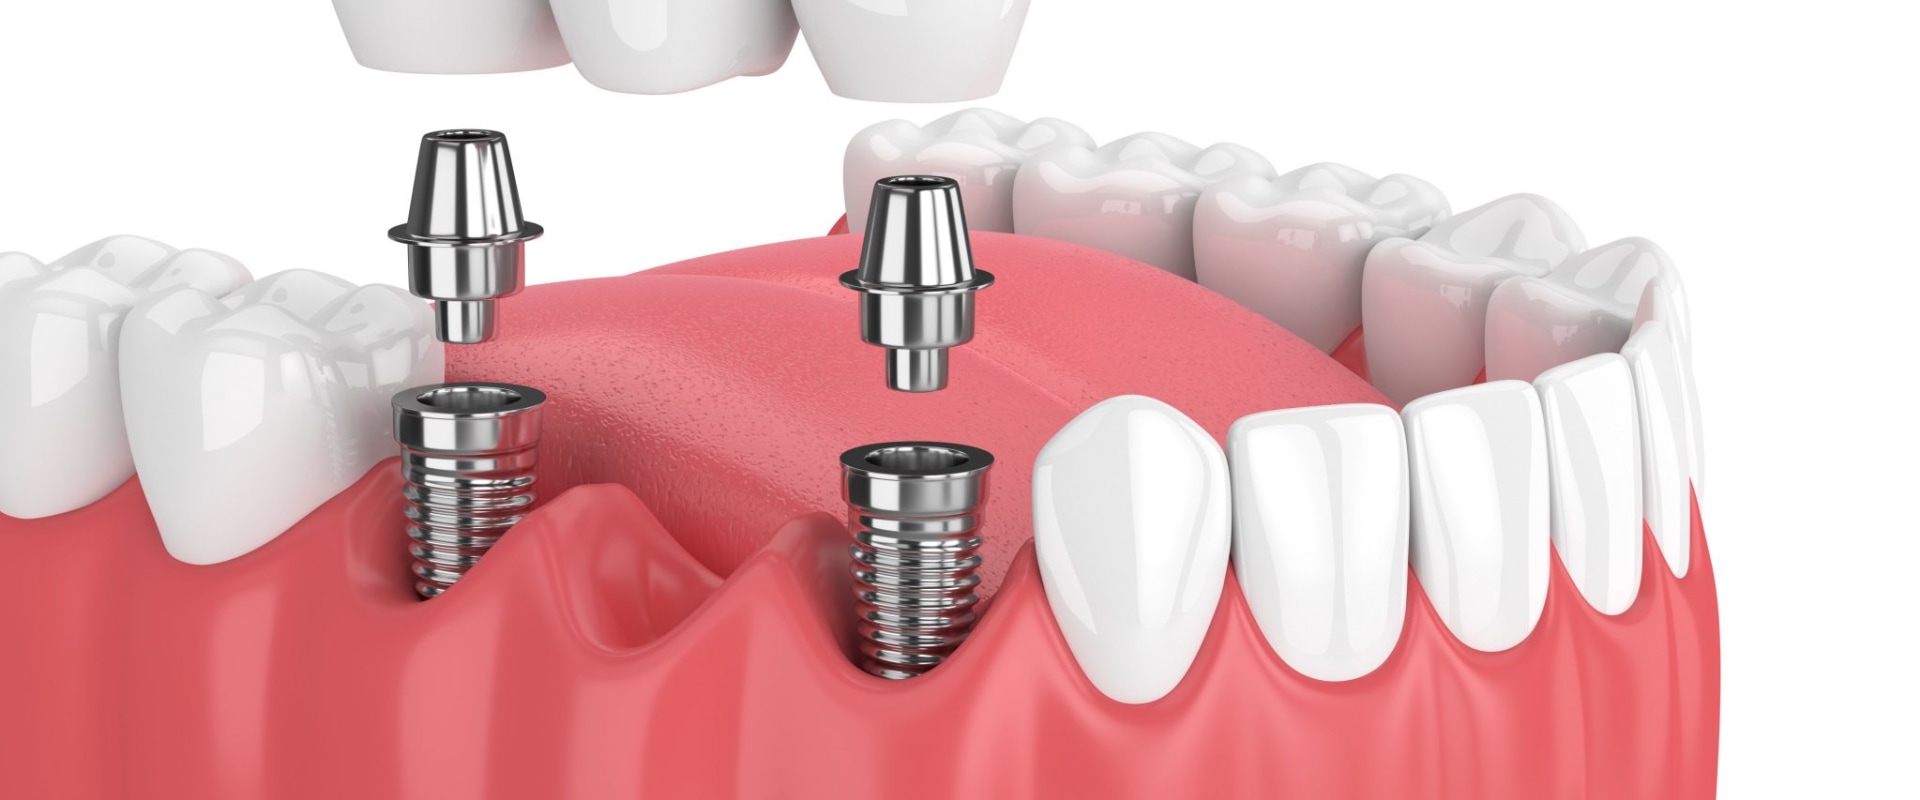 How long does pain last after dental implant?